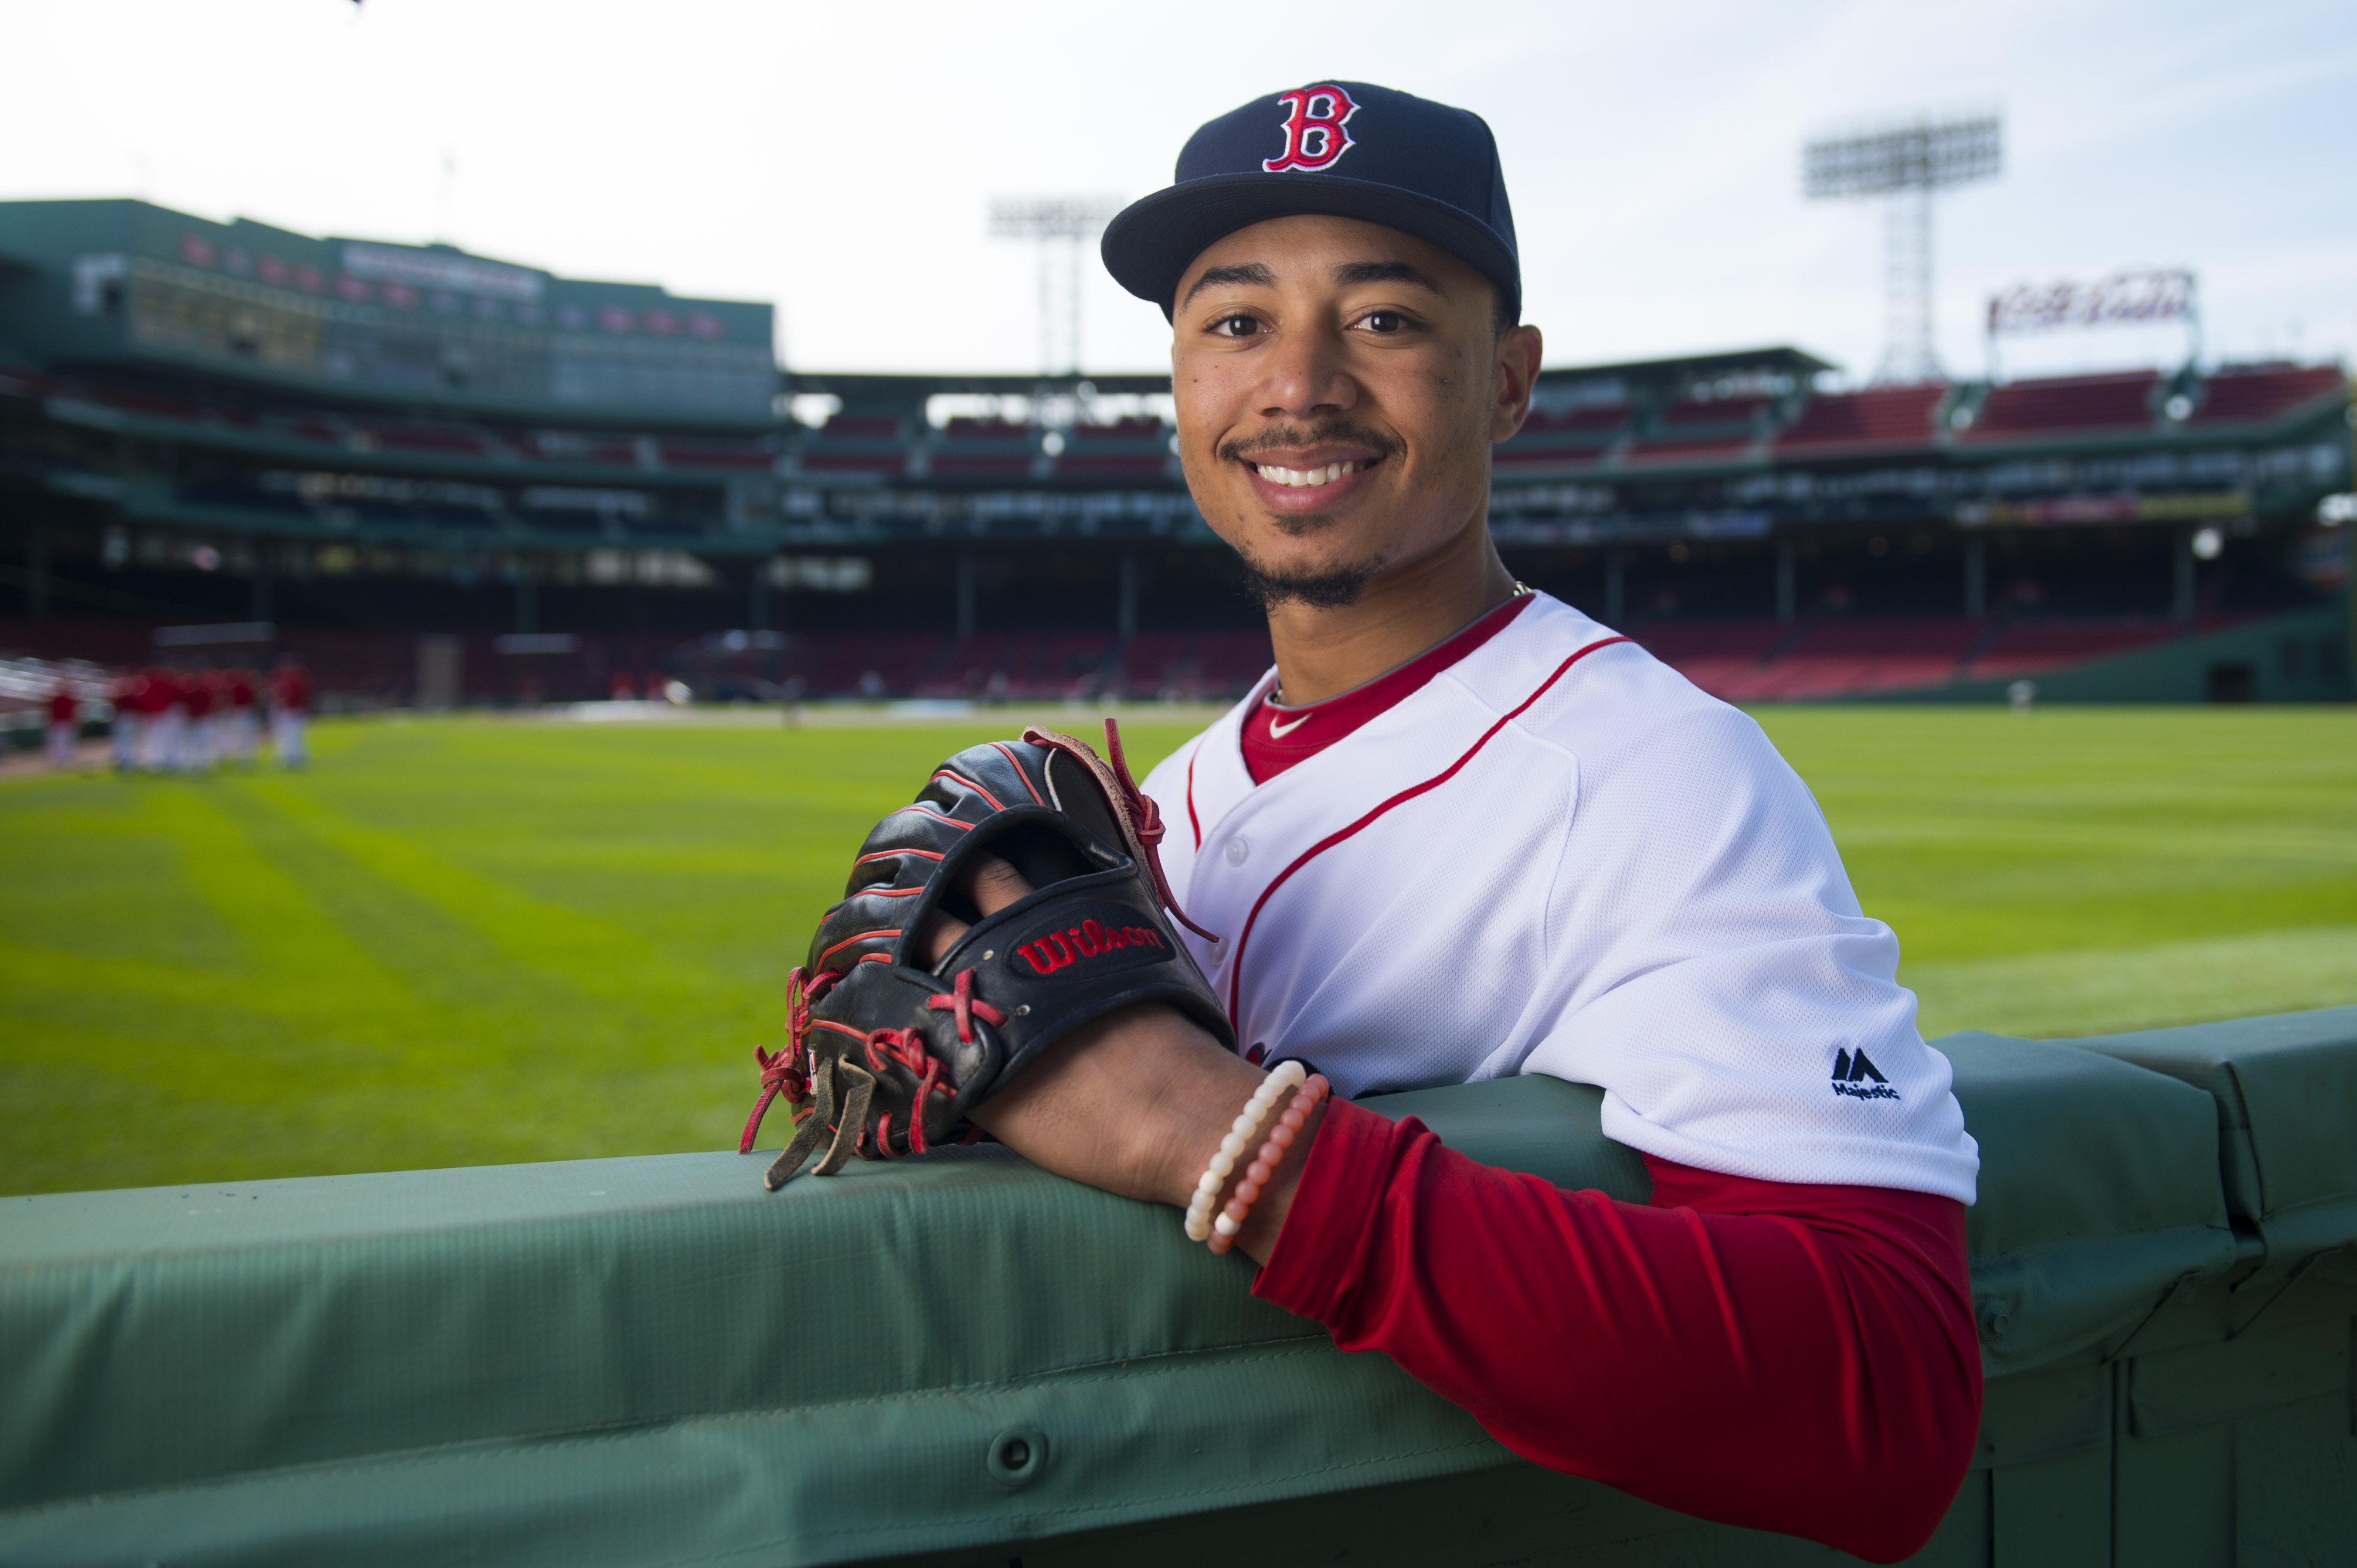 Mookie Betts #50 of the Boston Red Sox poses for a photograph in right field on April 28, 2016 at Fenway Park in Boston, Massachusetts. | Photo by Michael Ivins/Boston Red Sox/Getty Images